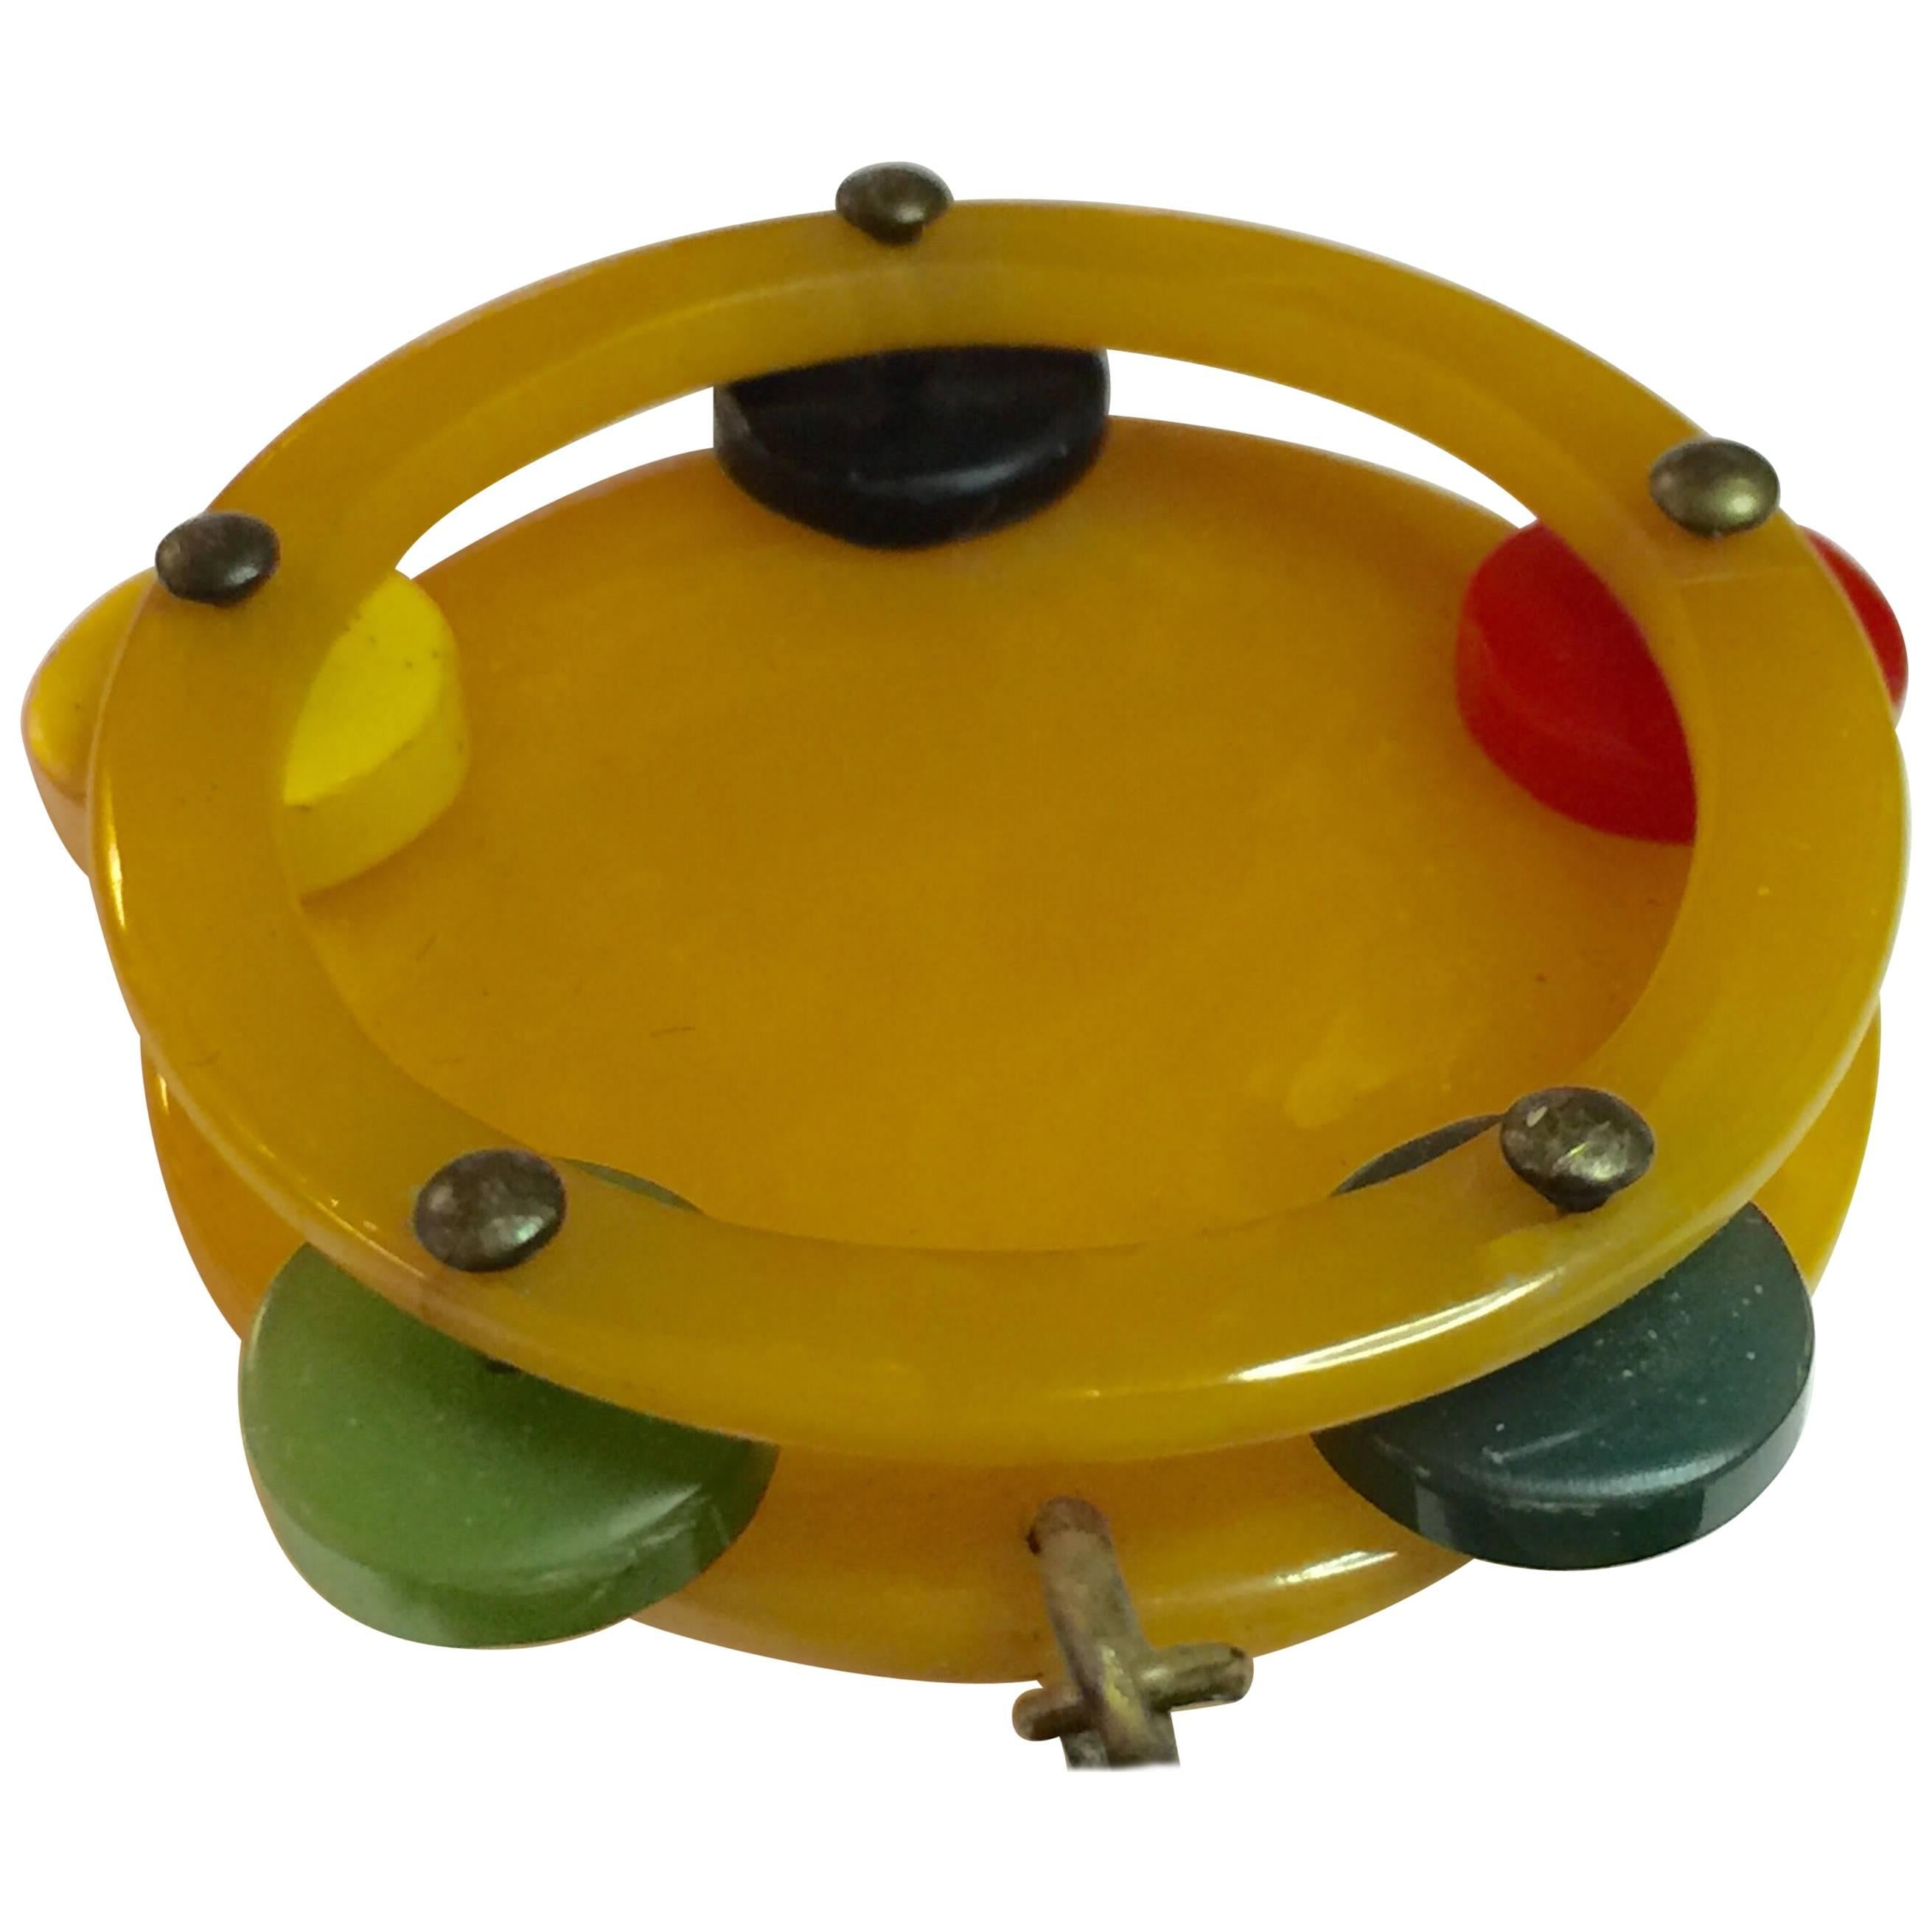 Always adorable are figural bakelite pins, and this 1930s Multicolored Bakelite Figural Tambourine Dangling from Bar Brooch Pin is no exception. An extremely rare pin, this dangling from a bar pin version is probably almost one of a kind. The